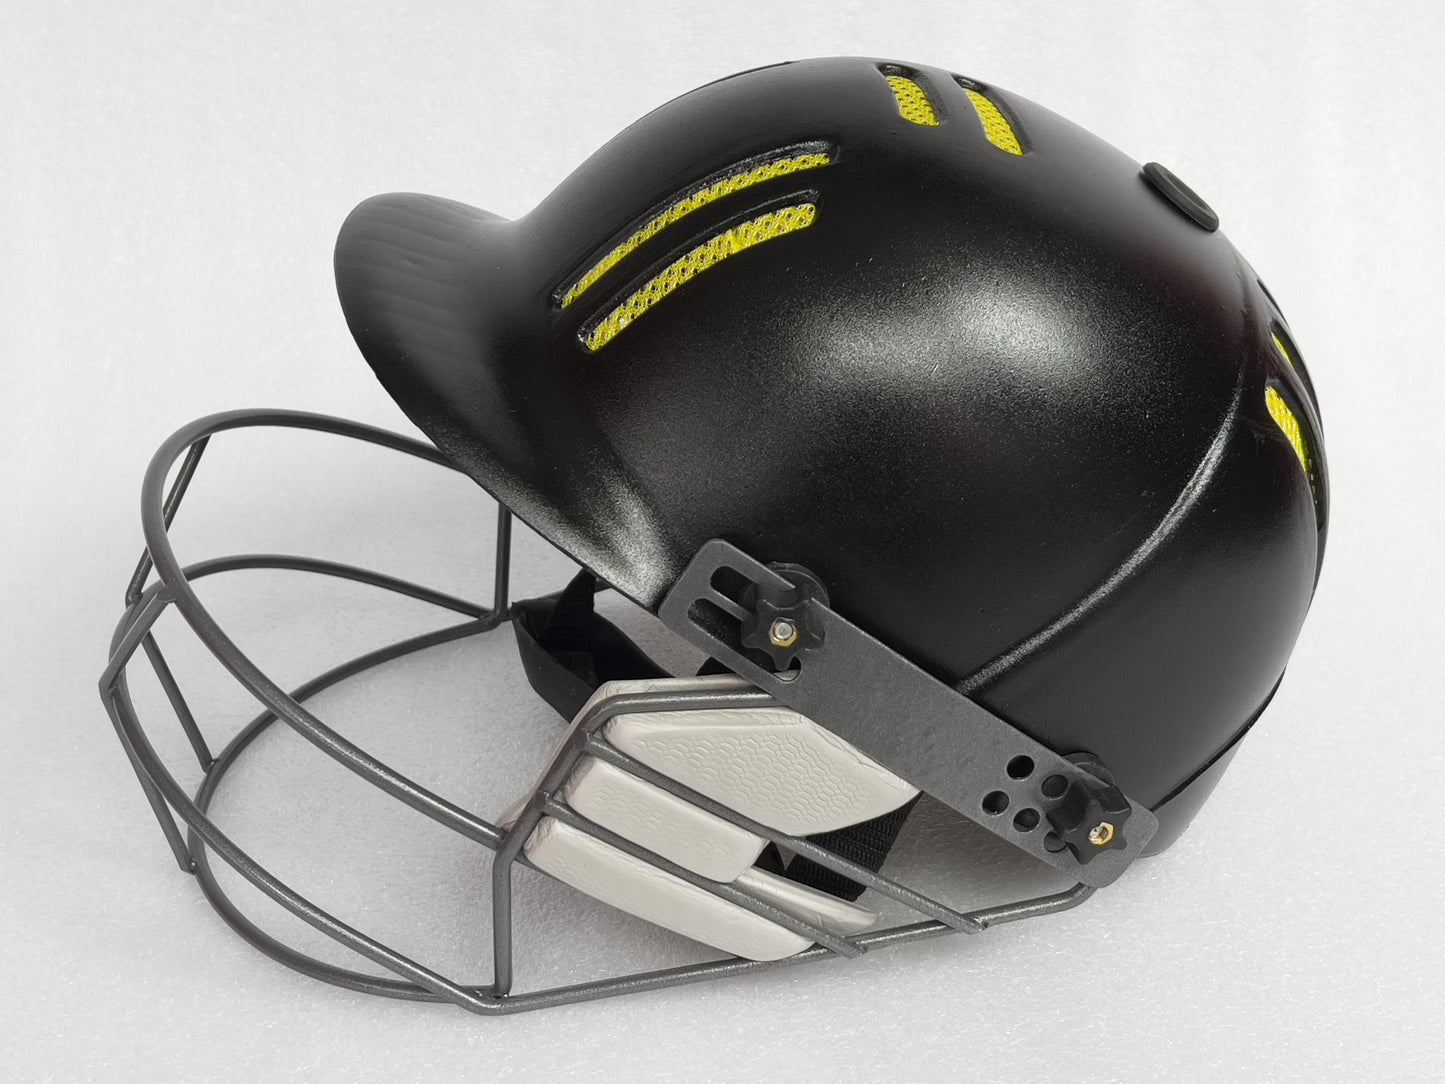 Black Ash Junior Cricket Helmet with an adjustable steel grill for superior protection and visibility, featuring an Air Flow cooling system for enhanced ventilation, very comfortable and secure fit, and available in 6 colors.